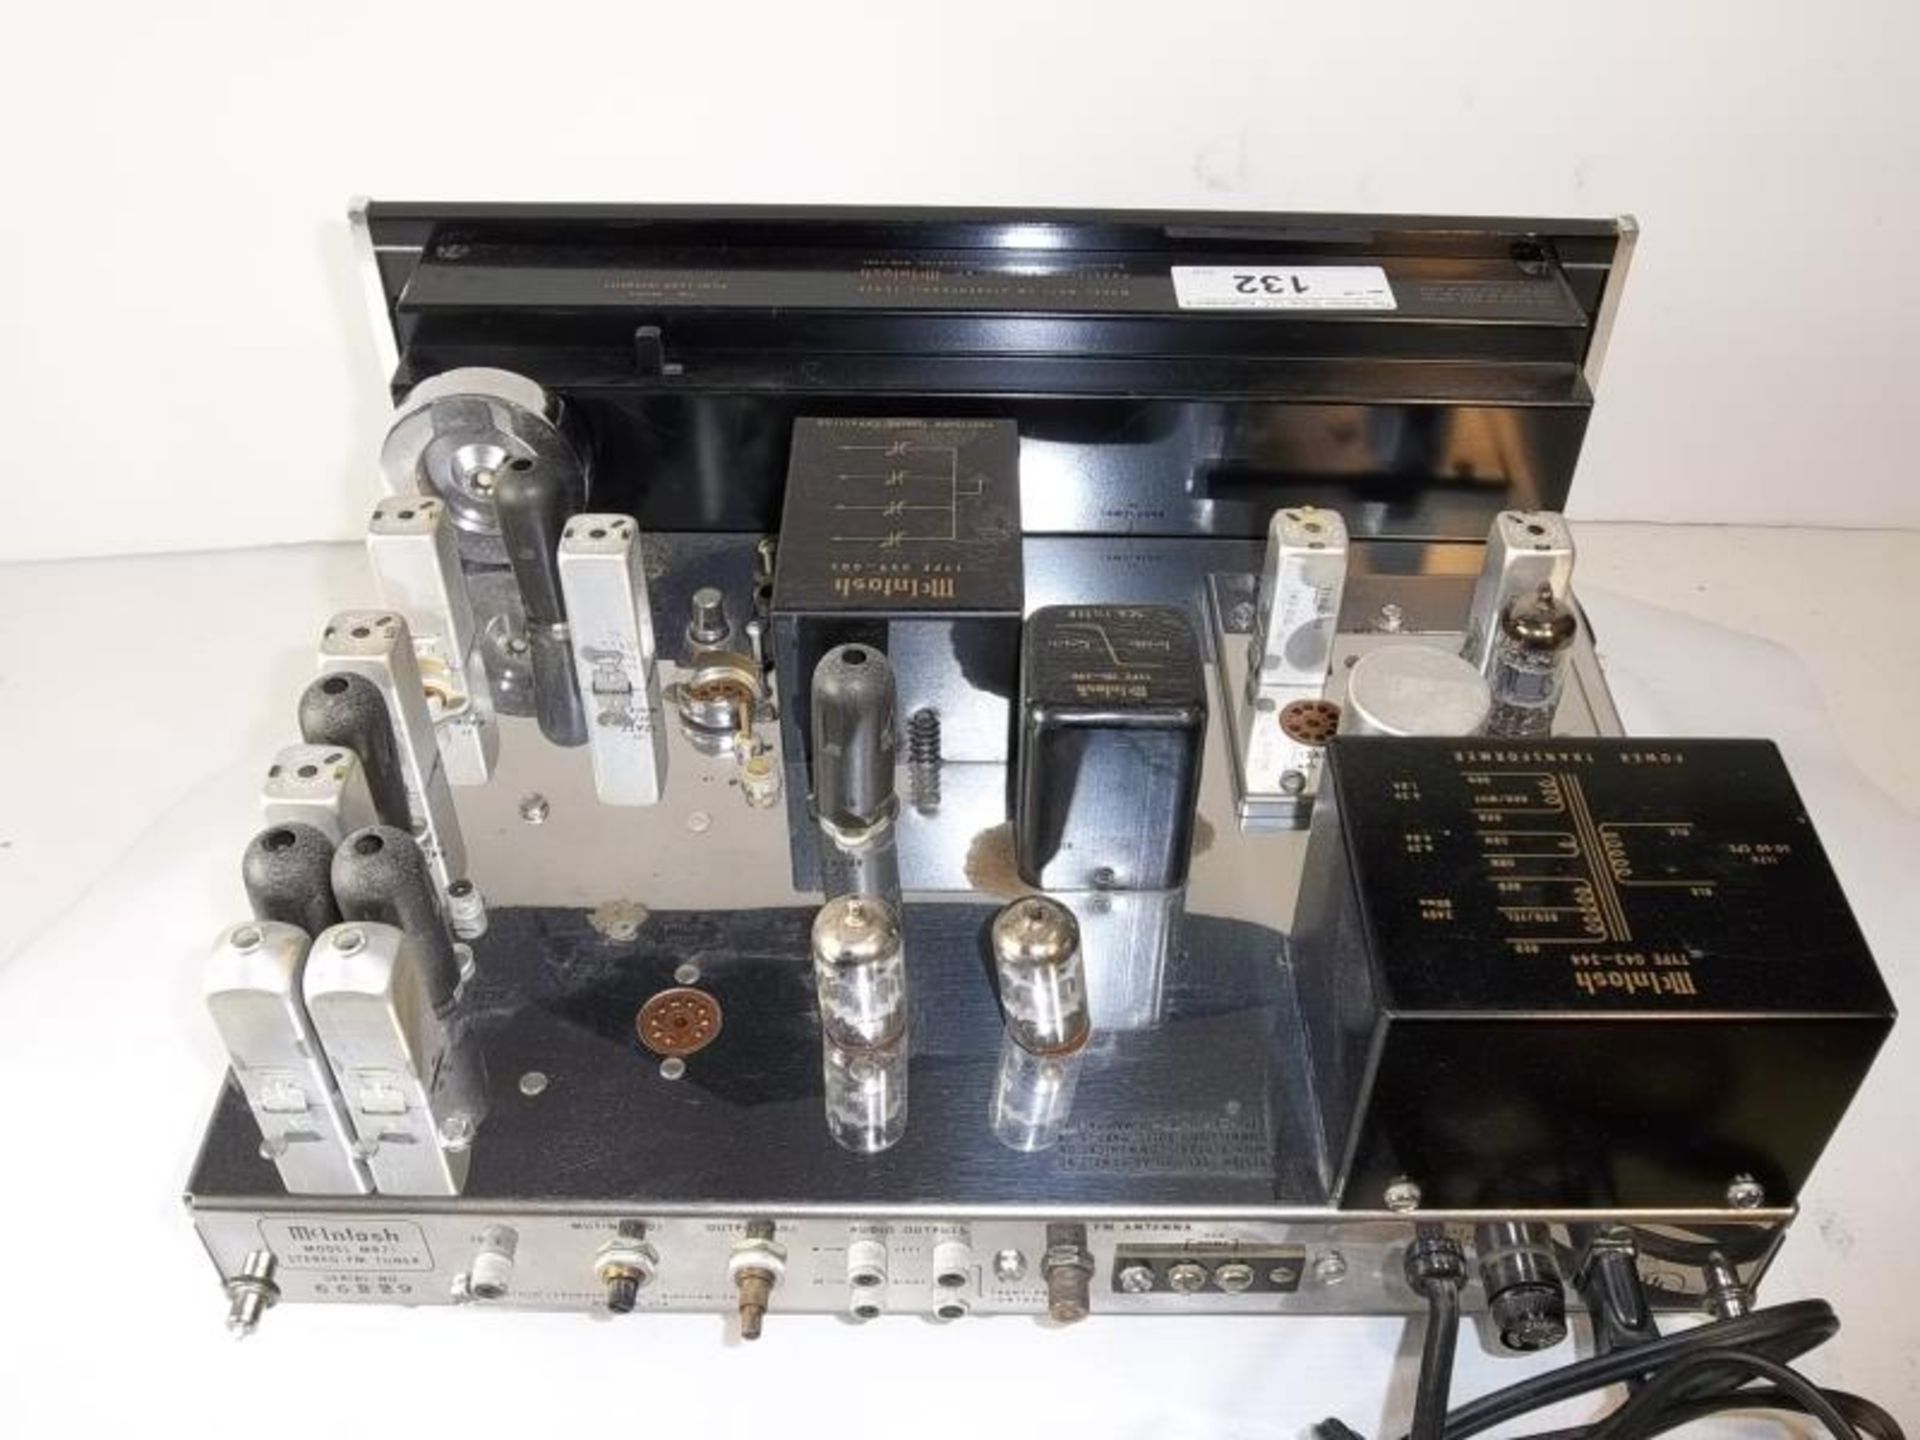 McIntosh MR-71 Stereo FM Tuner, parts only, missing tubes, no case, s # 66B29 - did not test - Image 5 of 6